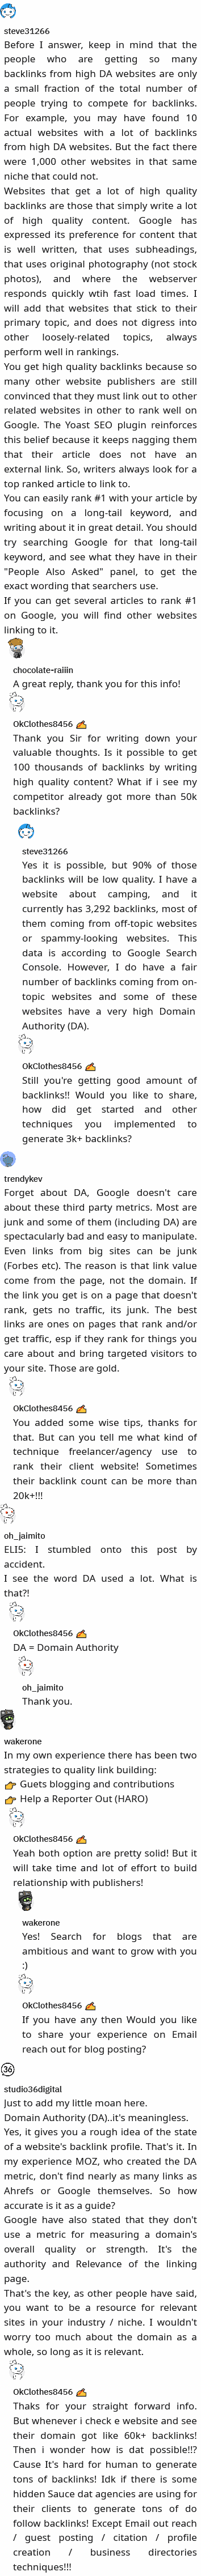 getting thousands of high-quality backlinks